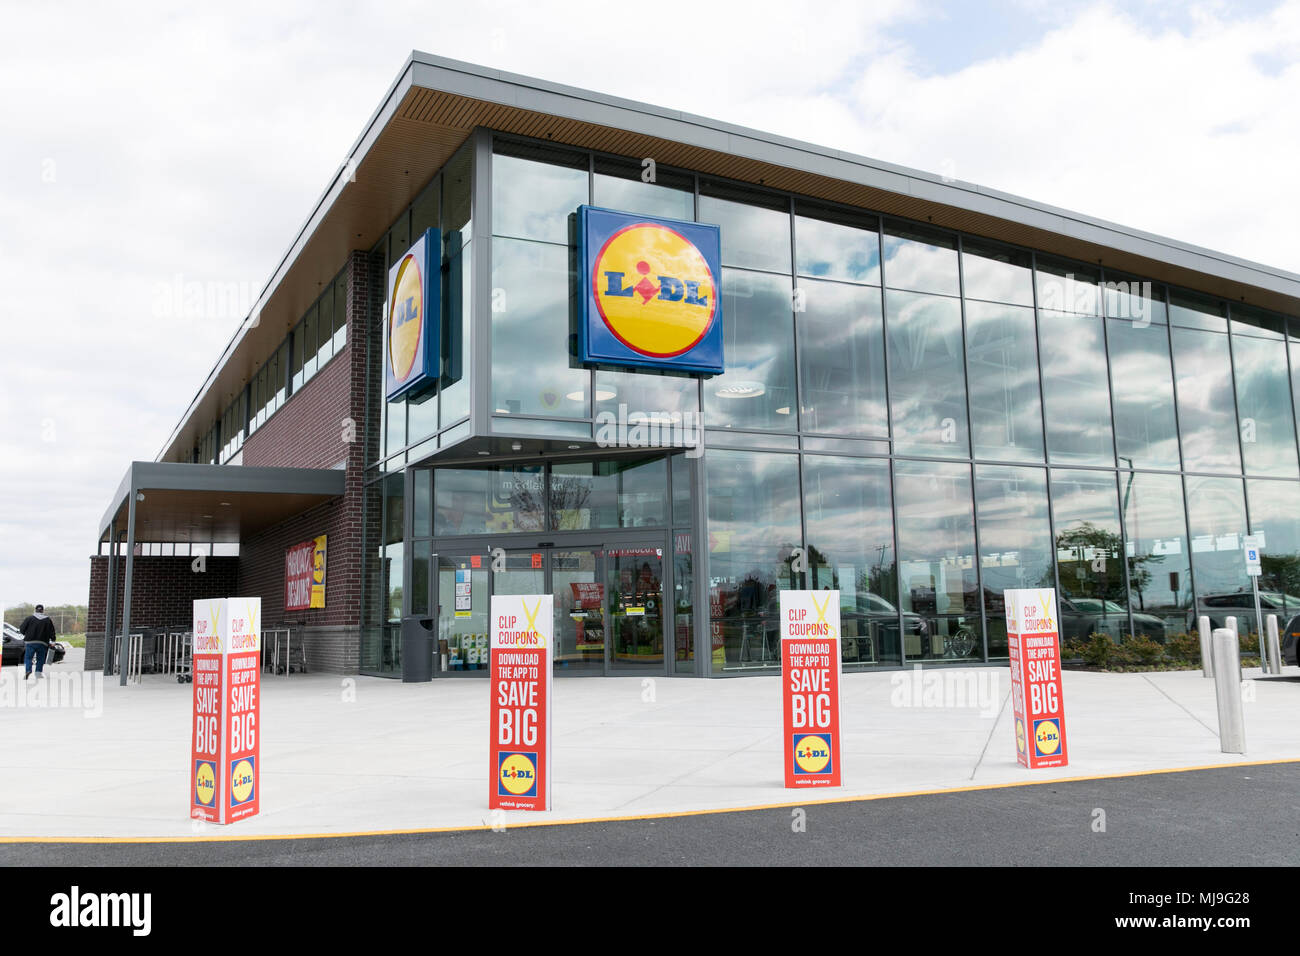 A logo sign outside of a Lidl grocery retail store in Middletown, Delaware on April 29, 2018. Stock Photo